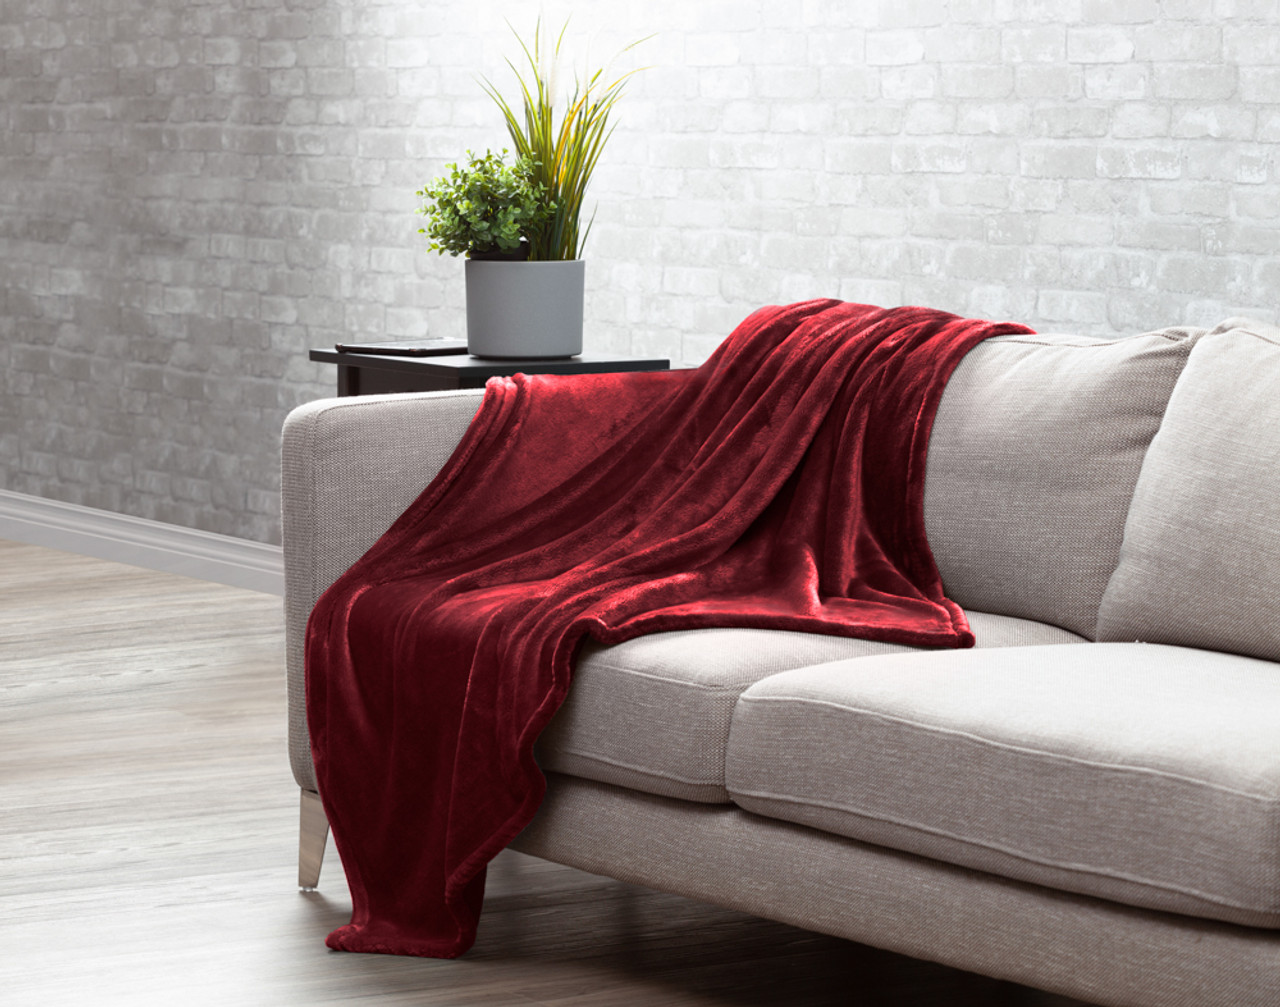 Our Velvet Plush Throw in Merlot draped over a beige couch in a white living room.